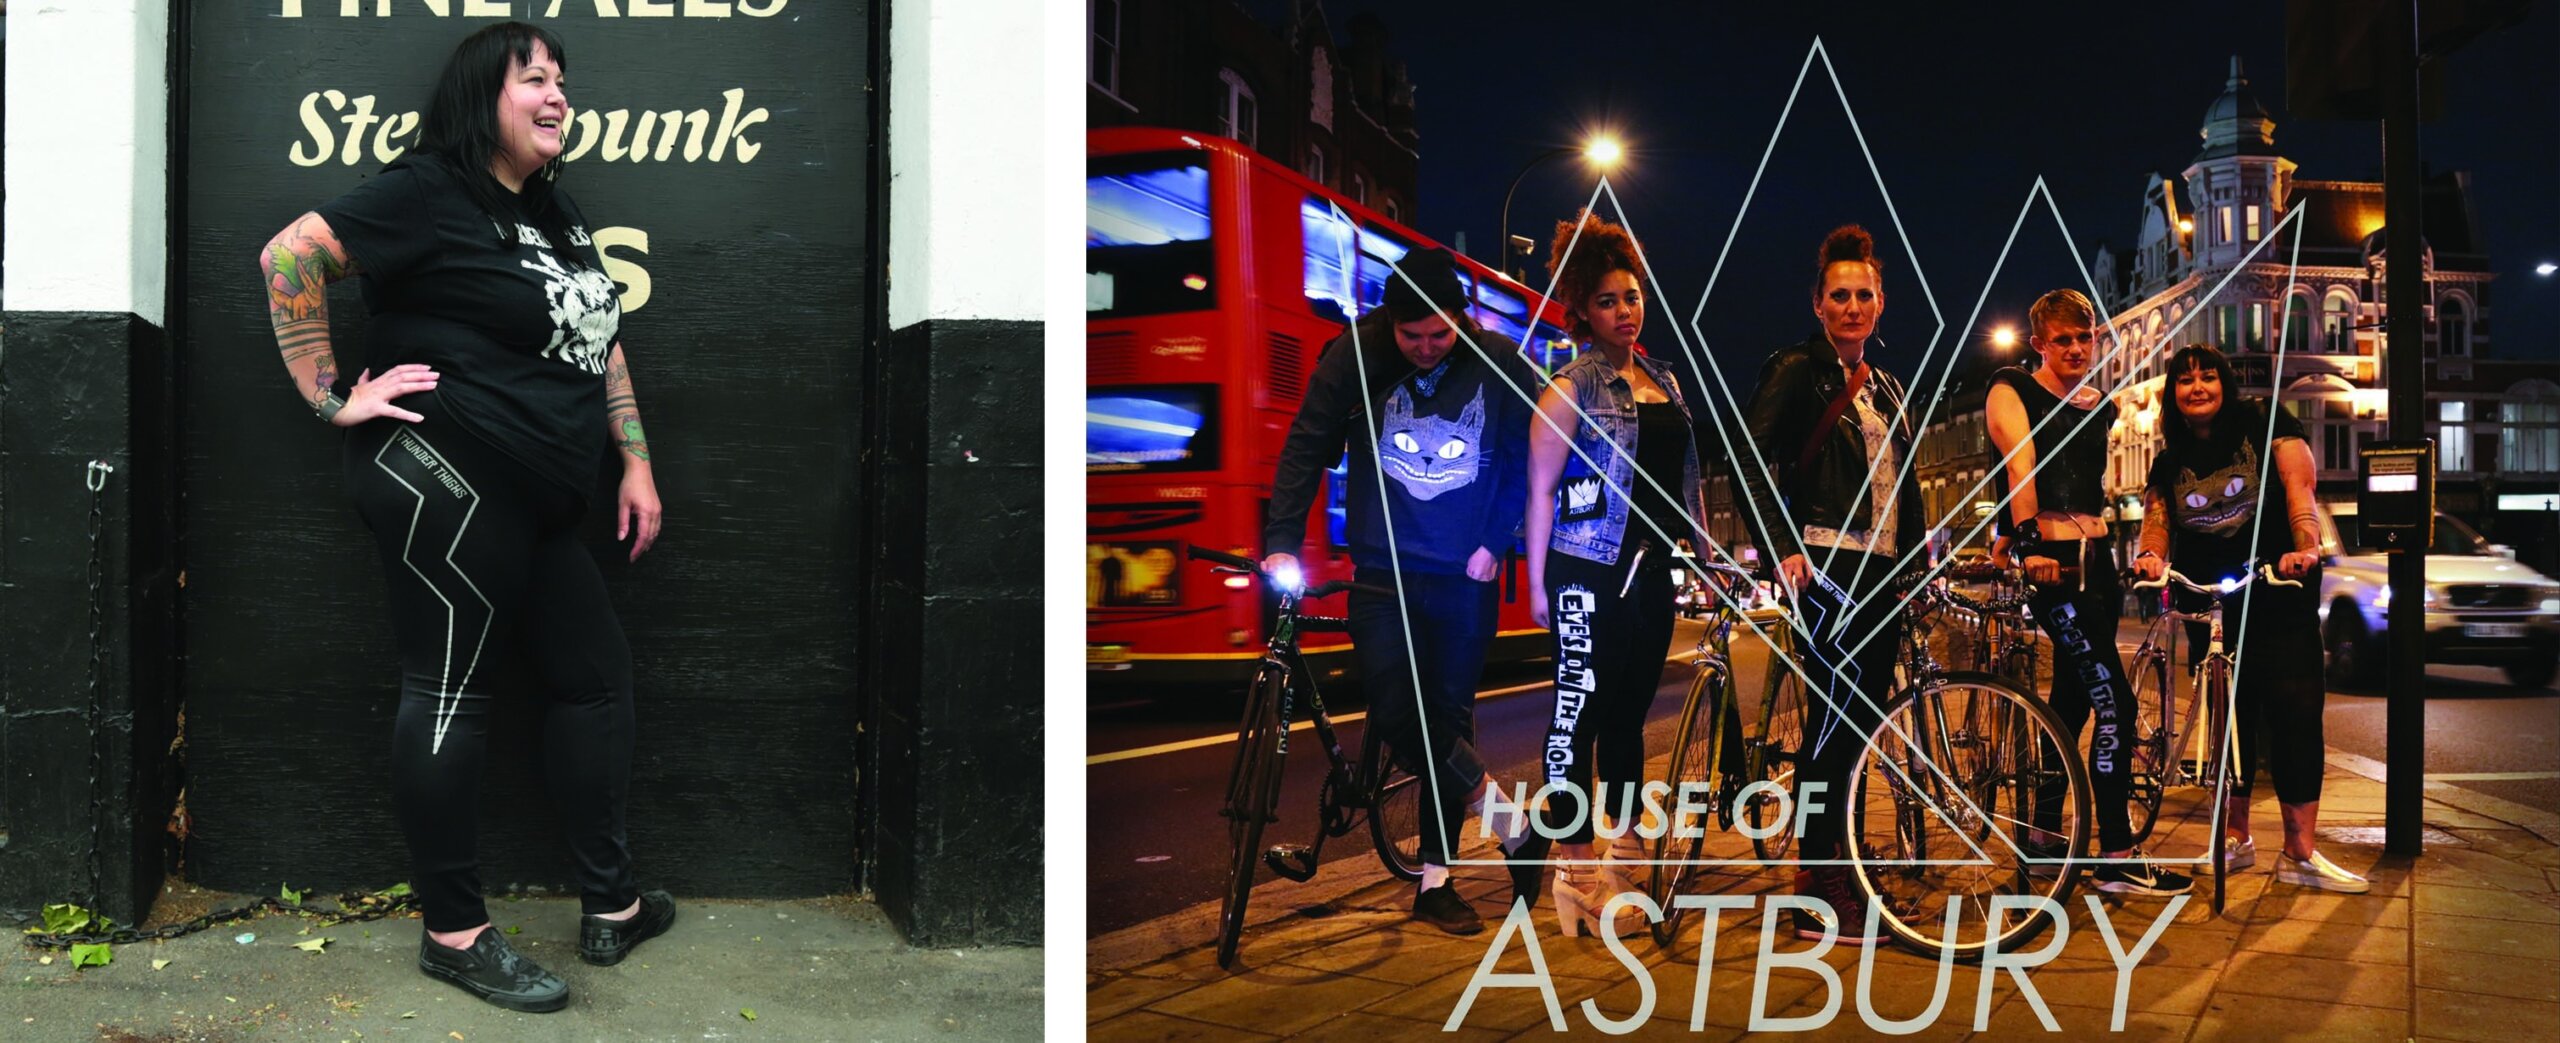 The leggings pictured were screen printed with reflective ink for cycling brand House of Astbury.